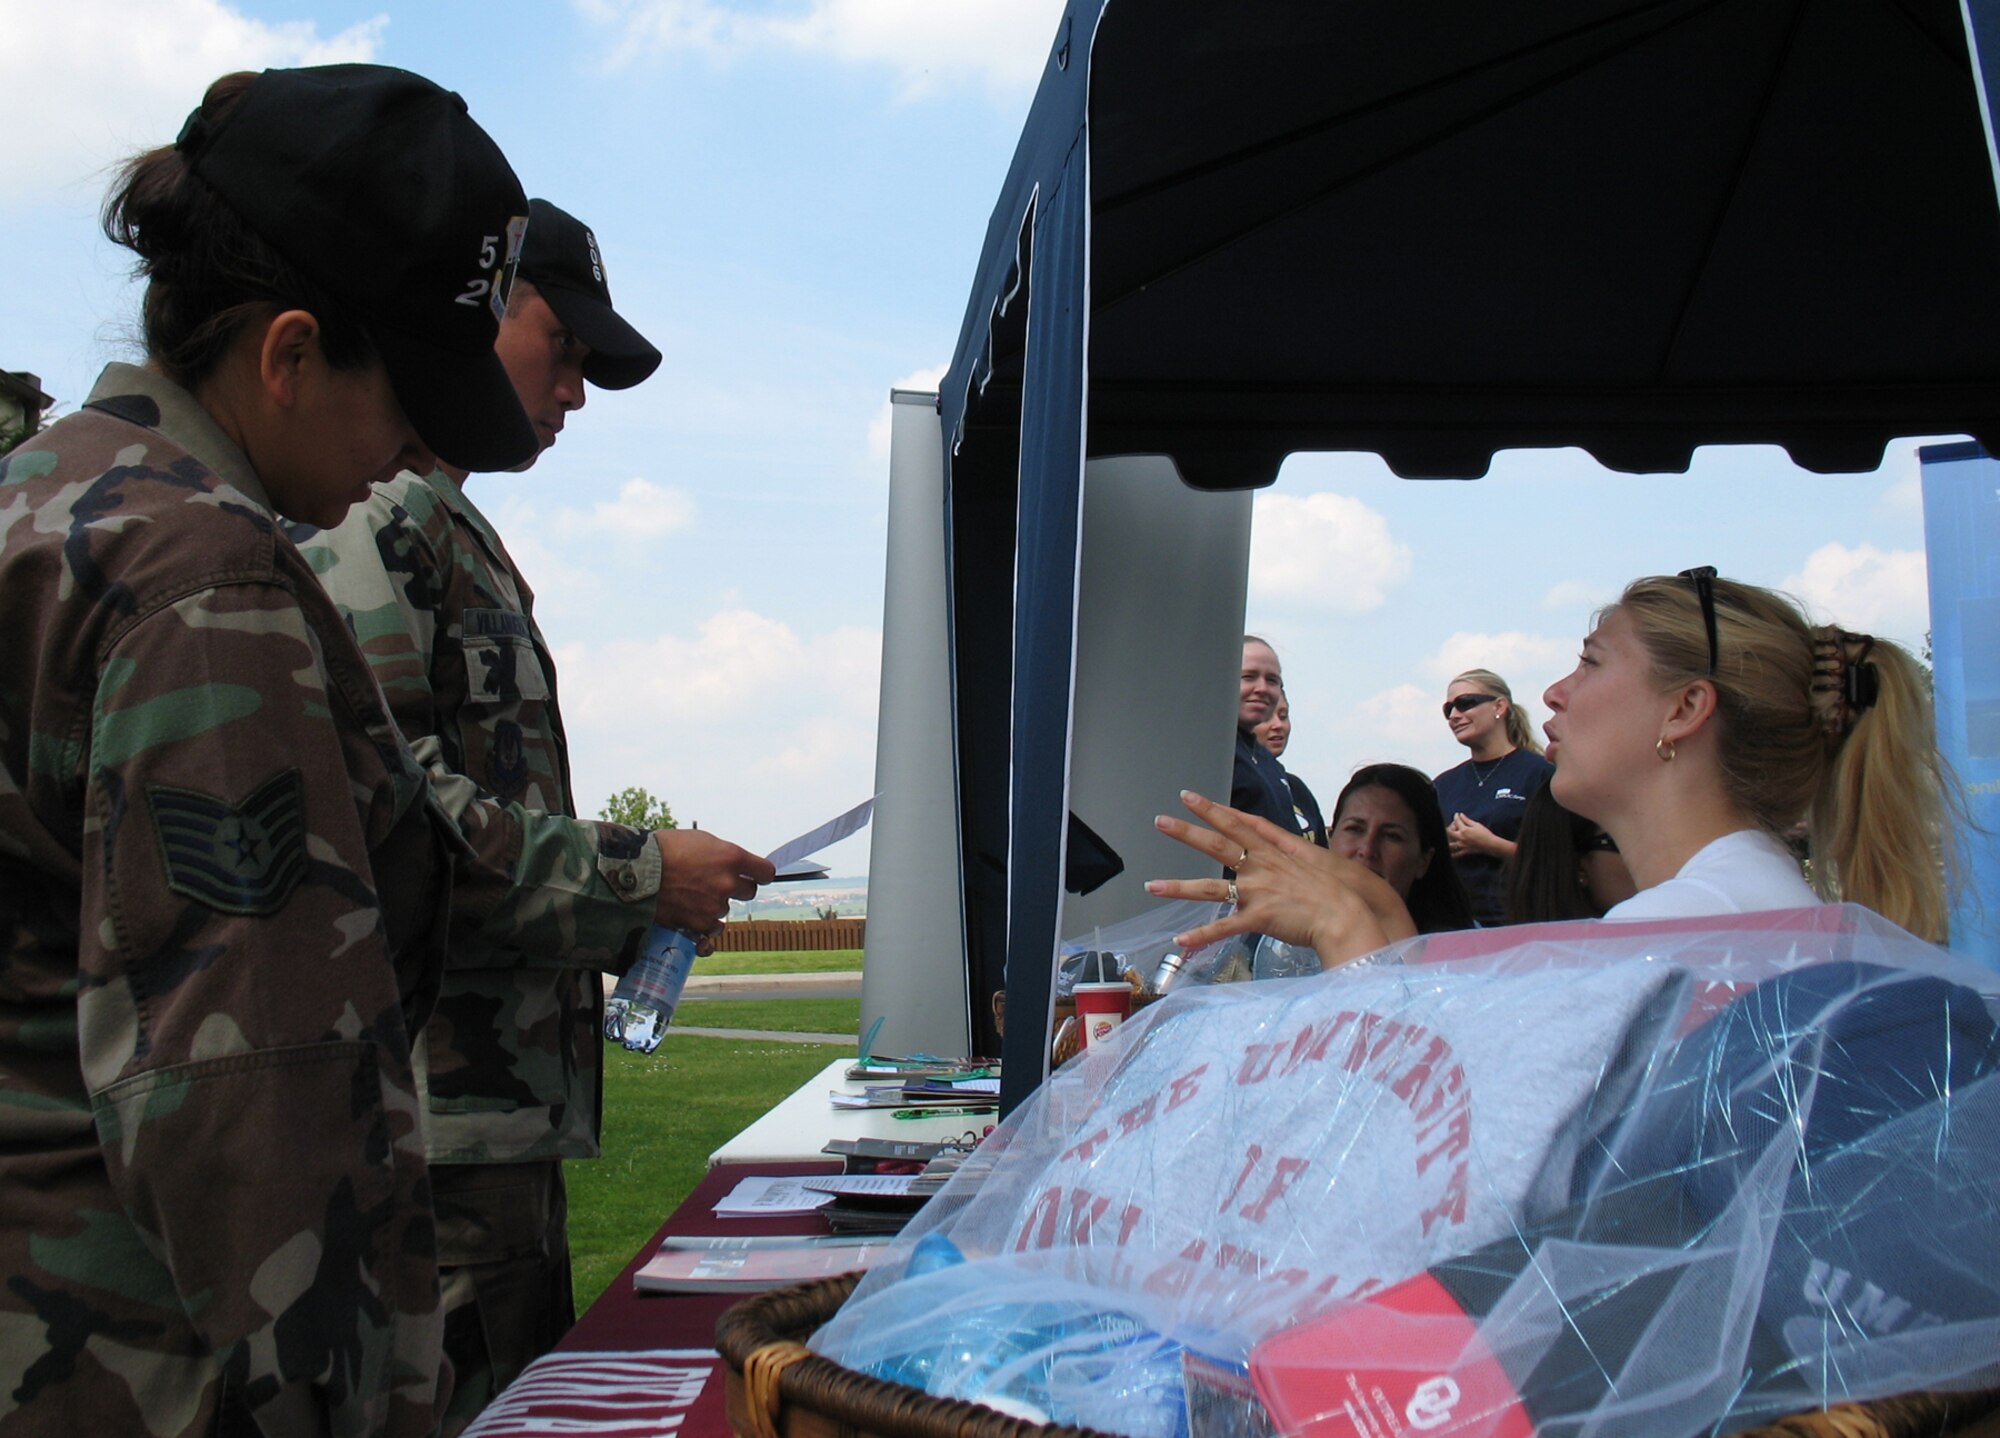 SPANGDAHLEM AIR BASE, Germany – Tech. Troy Margie Quicanopalacios, 52nd Medical Support Squadron, and 1st Lt. Rommel Rommel Villanueva, 606th Air Control Squadron, learn about the masters programs offered by the University of Oklahoma at an education fair Aug. 3. (US Air Force photo/Staff Sgt. Tammie Moore)